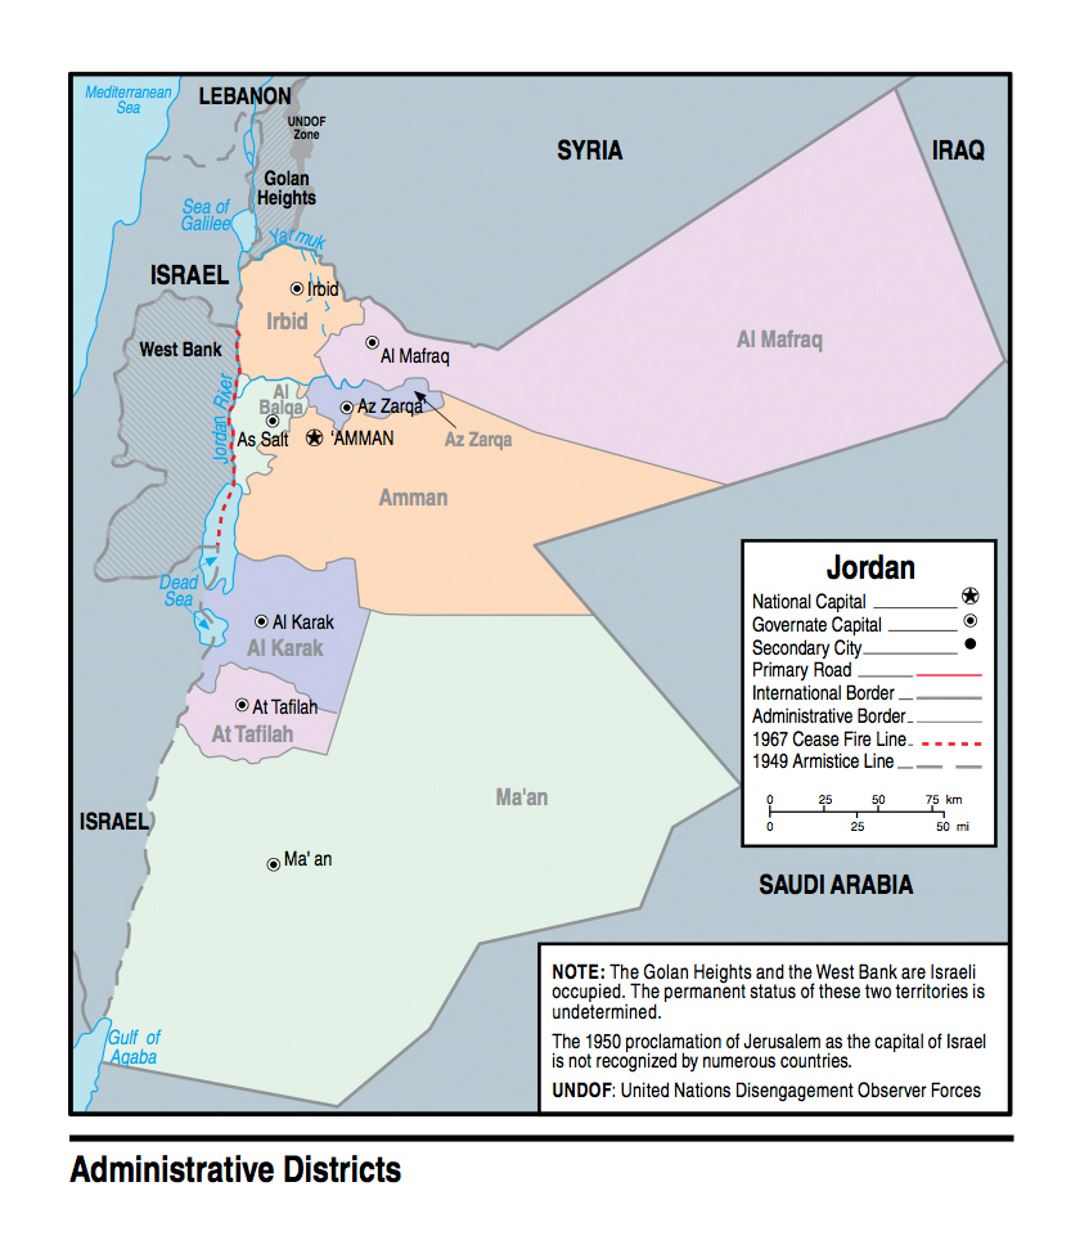 Detailed administrative districts map of Jordan - 2009